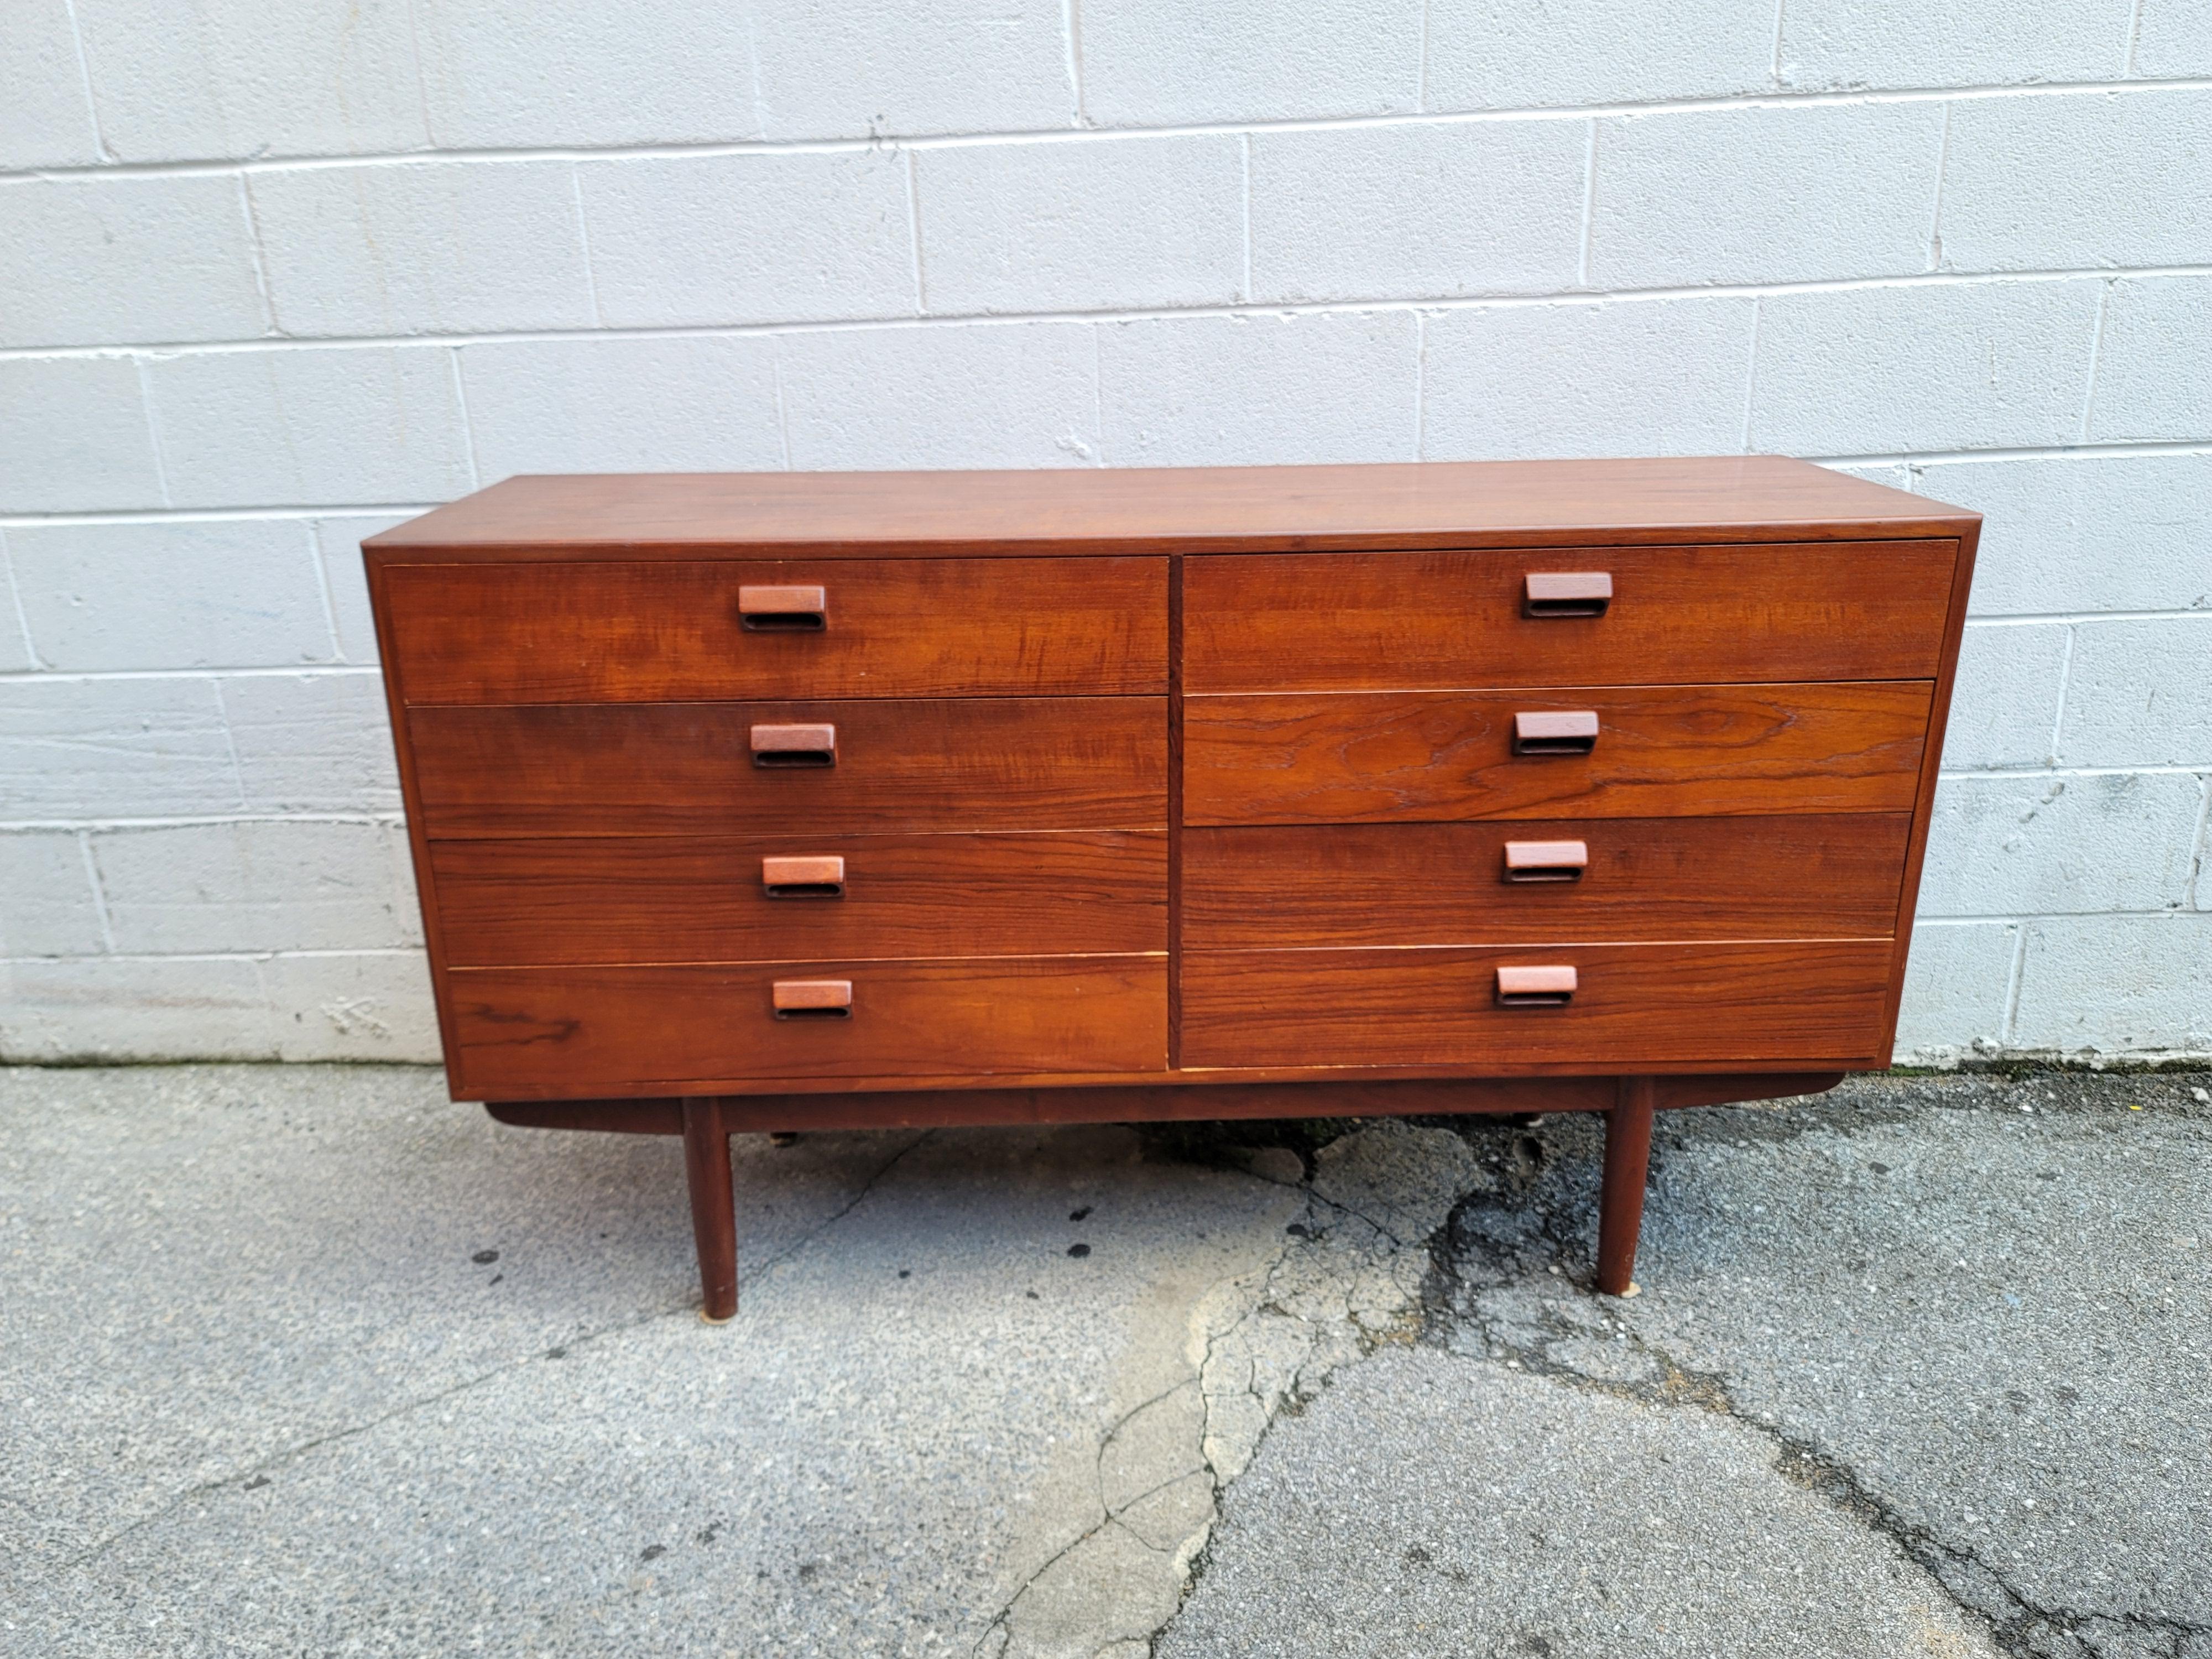 This Danish modern eight-drawer dresser was designed by Borge Mogensen for Soborg Mobler. The dresser was acquired from the family of the original owners and is in very good condition with little wear. The teak is beautifully aged with gorgeous